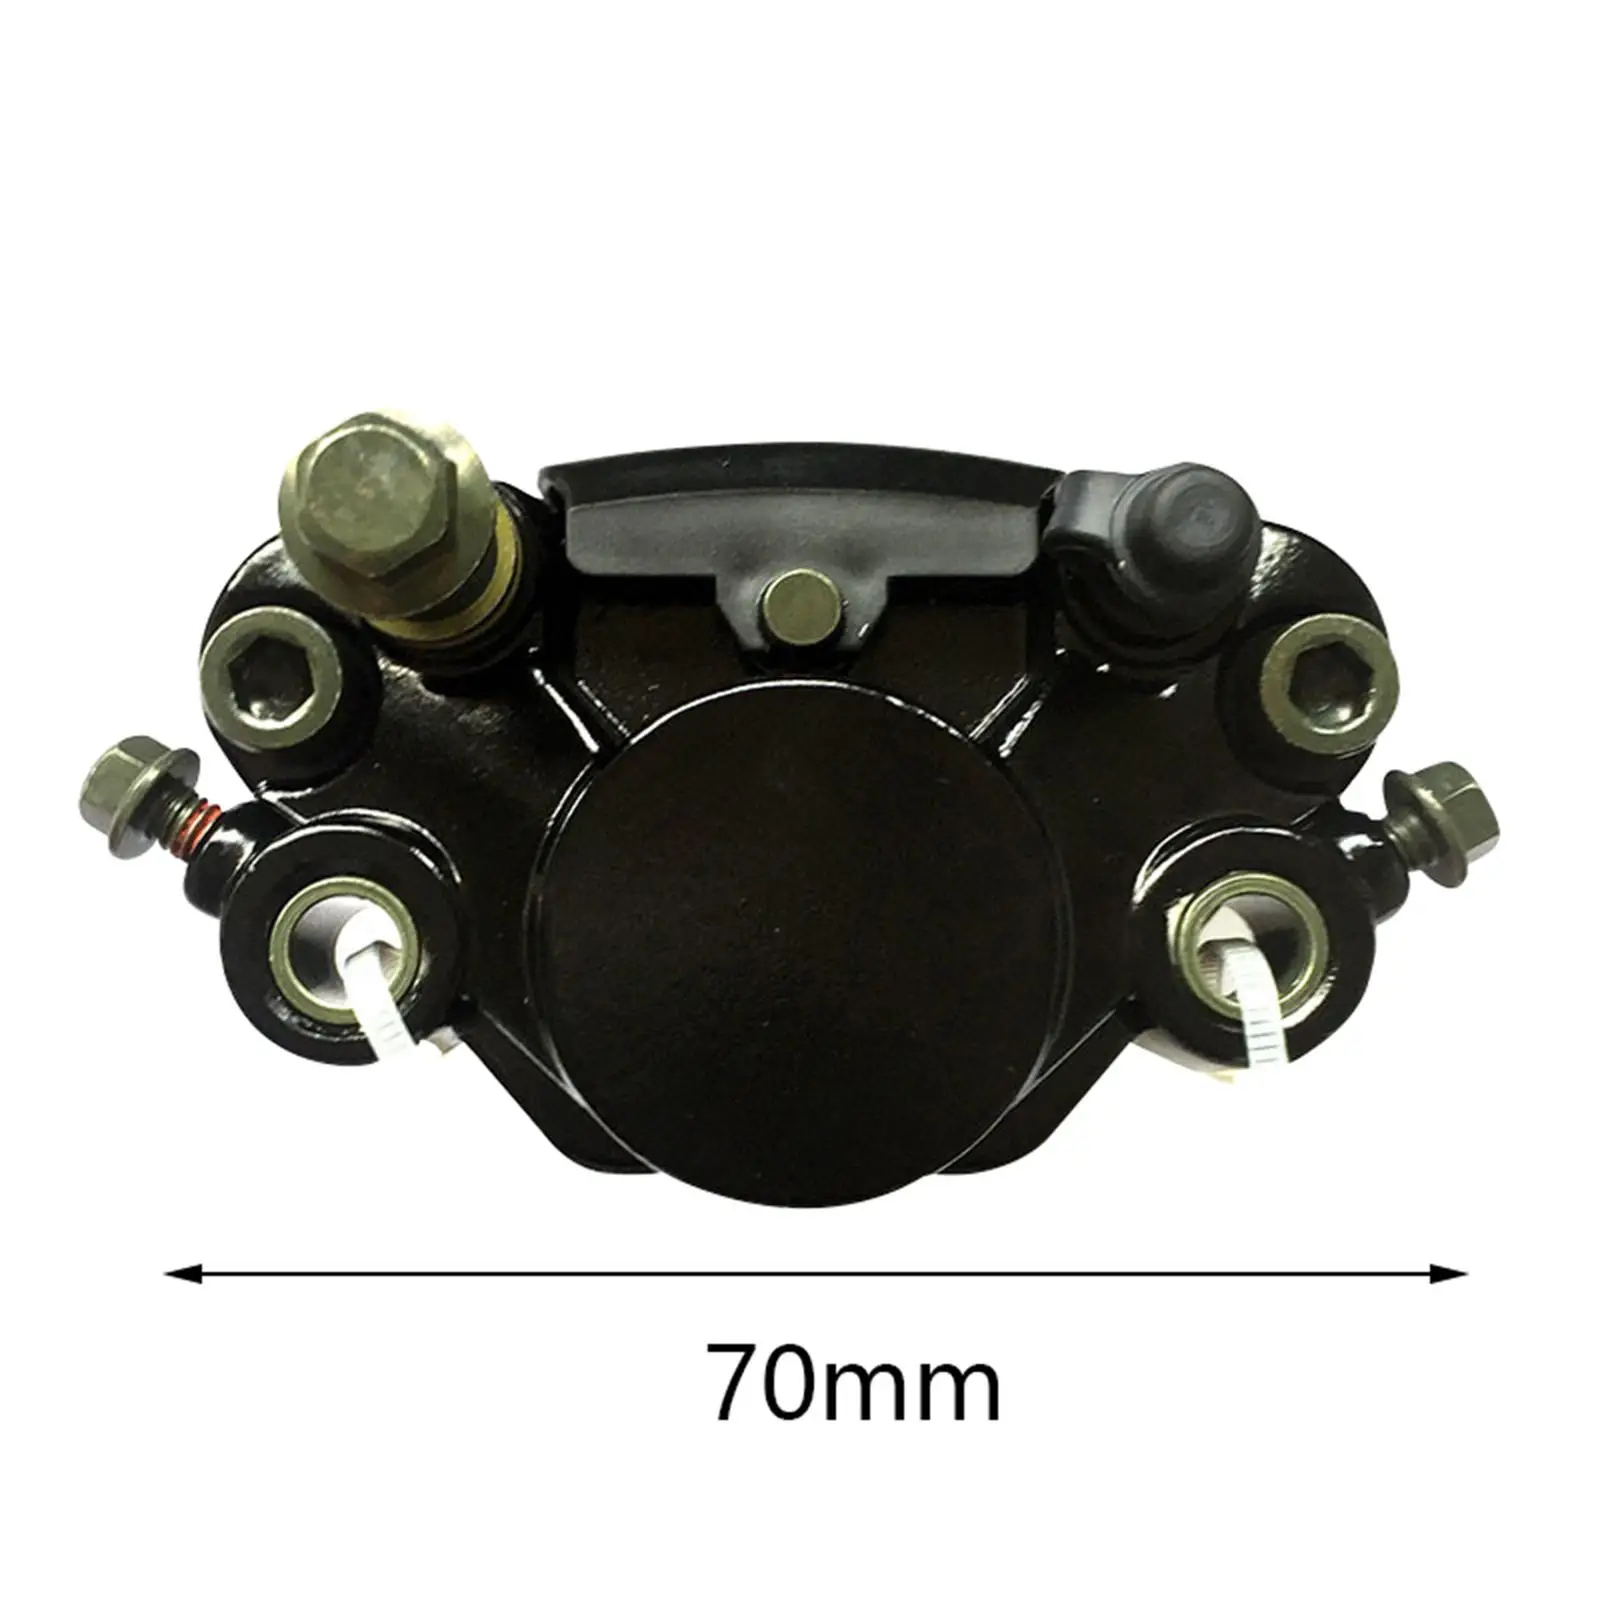 Motorcycle Hydraulic Front Rear Brake Caliper ,Black Durable Replaces Master Cylinder Brake Pad System